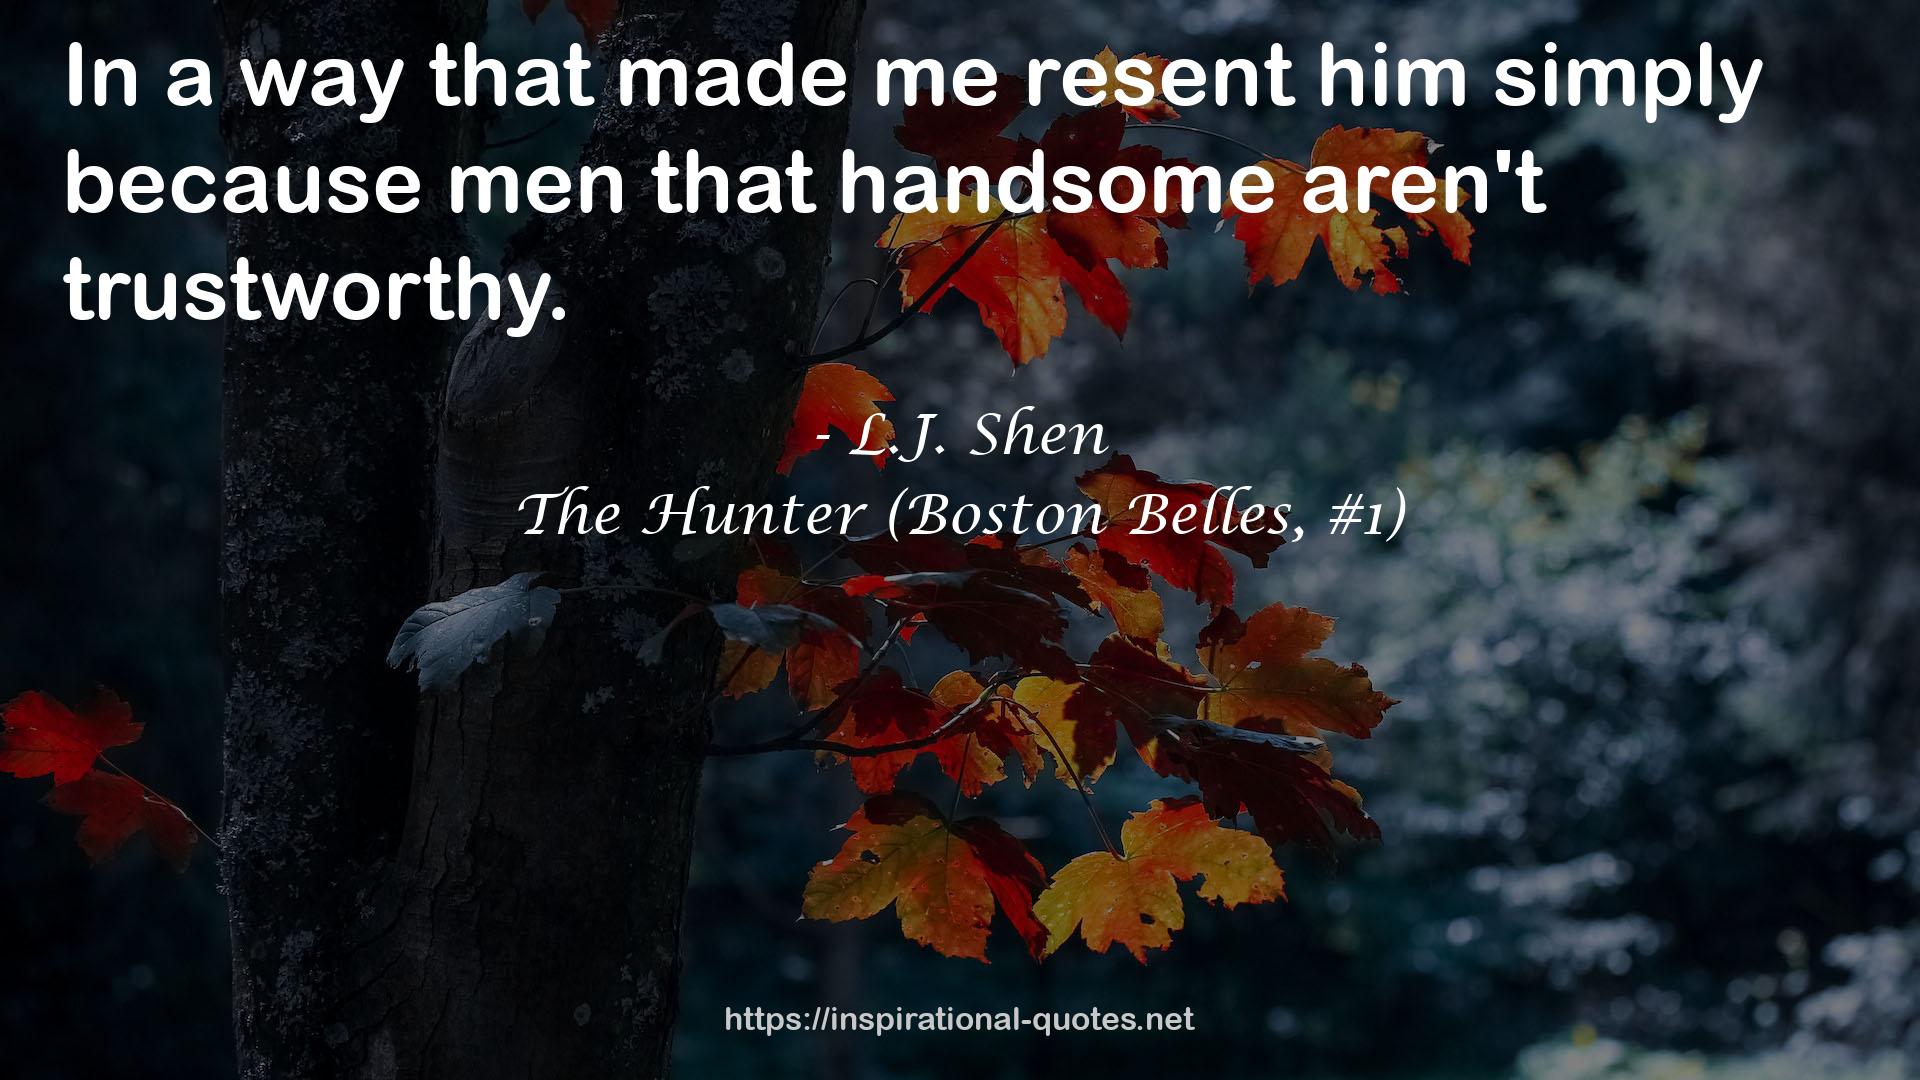 The Hunter (Boston Belles, #1) QUOTES